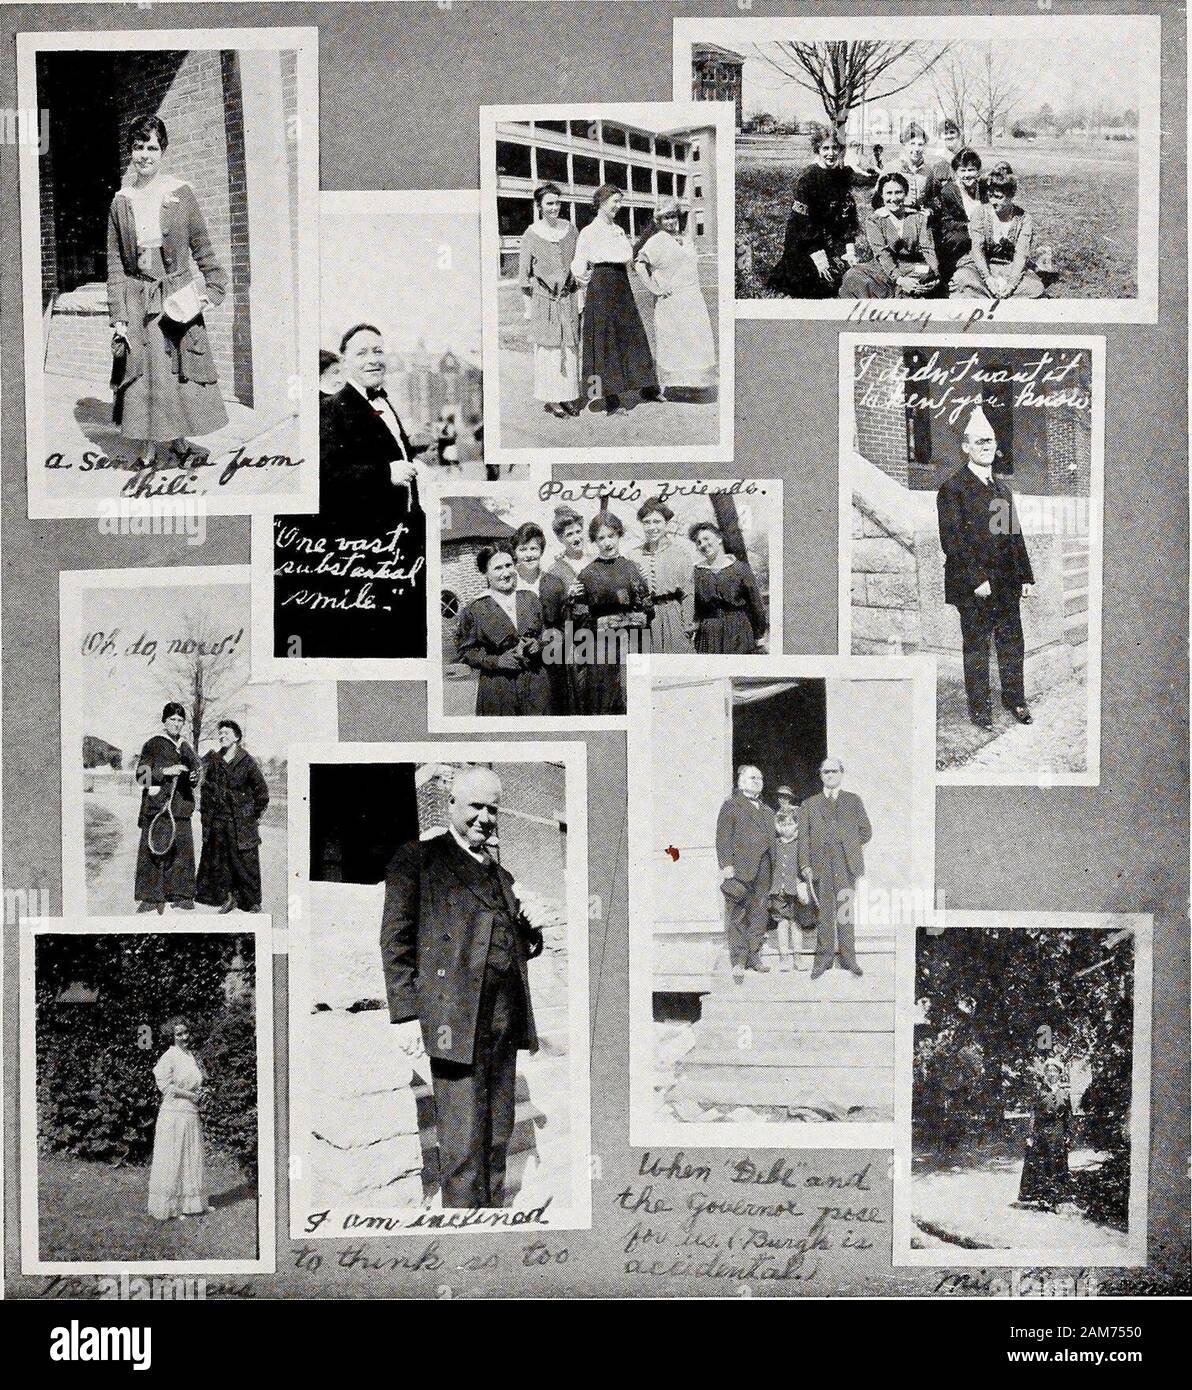 Tatler . Page Sixteen ^. FACULTY Page Seventeen David Bancroft Johnson, A. B., A. M., LL. D. University of Tennessee; South Carolina College P7esident J. W. Thompson, A. B. Erskine CollegePedagogy and Ethics J. Thompson Brown, A. B., M. A. University of VirginiaEnglish Language and Literature E. C. COKER, B. A. University of Virginia Mathematics, Physics, a,nd Astronomy Roy Z. Thomas, A. B., A. M., Ph. D.Western Maryland College; West Lafayette College; Student at Johns Hopkins UniversityNatural Sciences James Elliott Walmsley, A. B., A. M., Ph. D.Randolph-Macon College; Illinois Wesleyan Univ Stock Photo